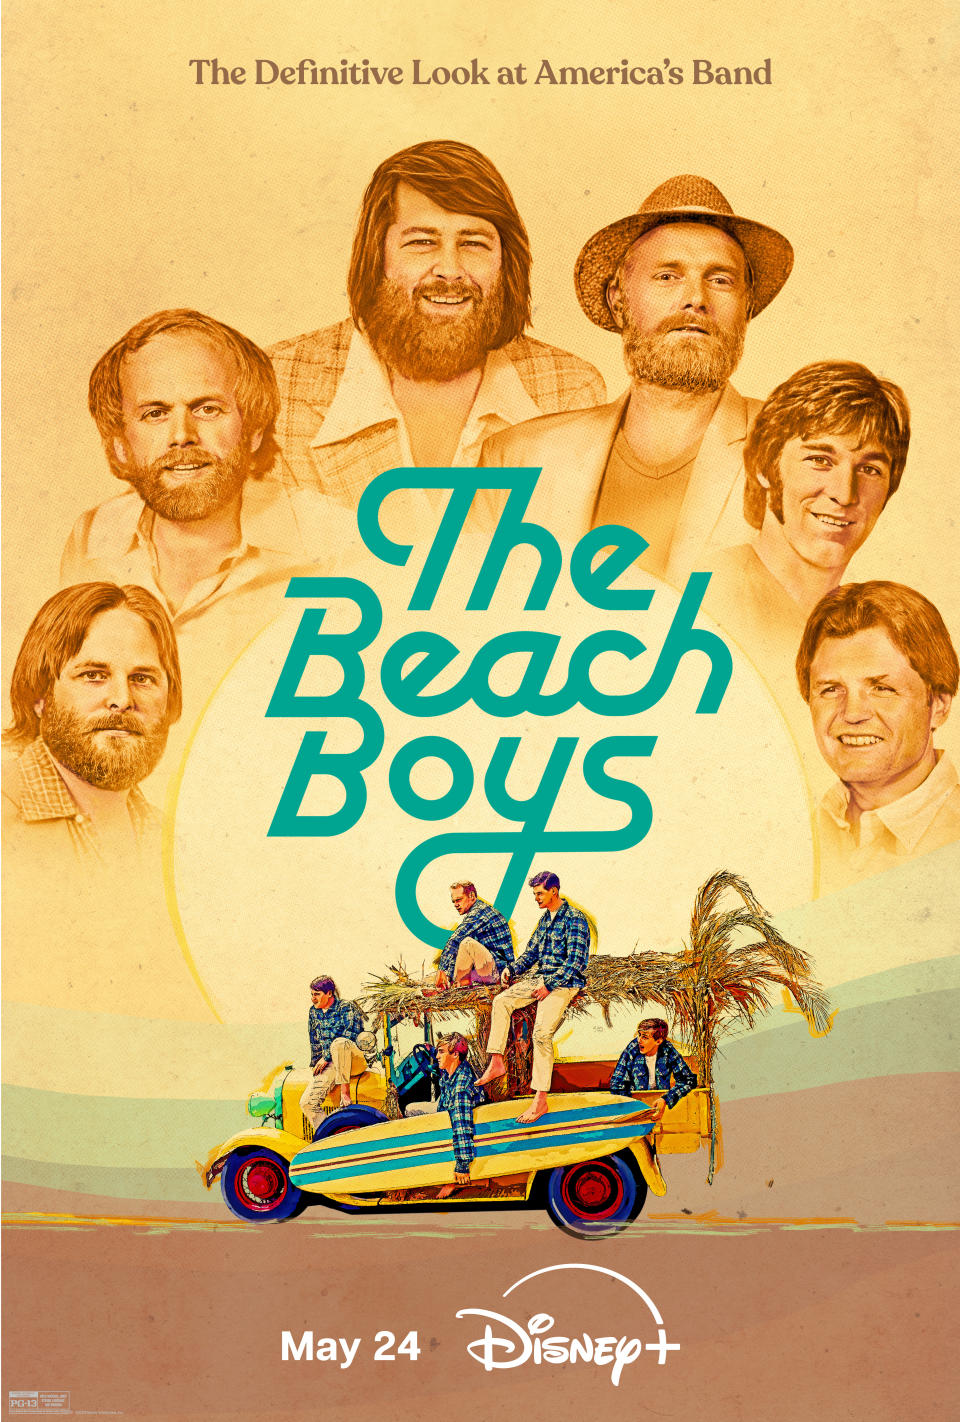 The Beach Boys, amidst a surf buggy environment, in a graphic for the new documentary about them.  The words at the top read: The definitive look at America's Band.